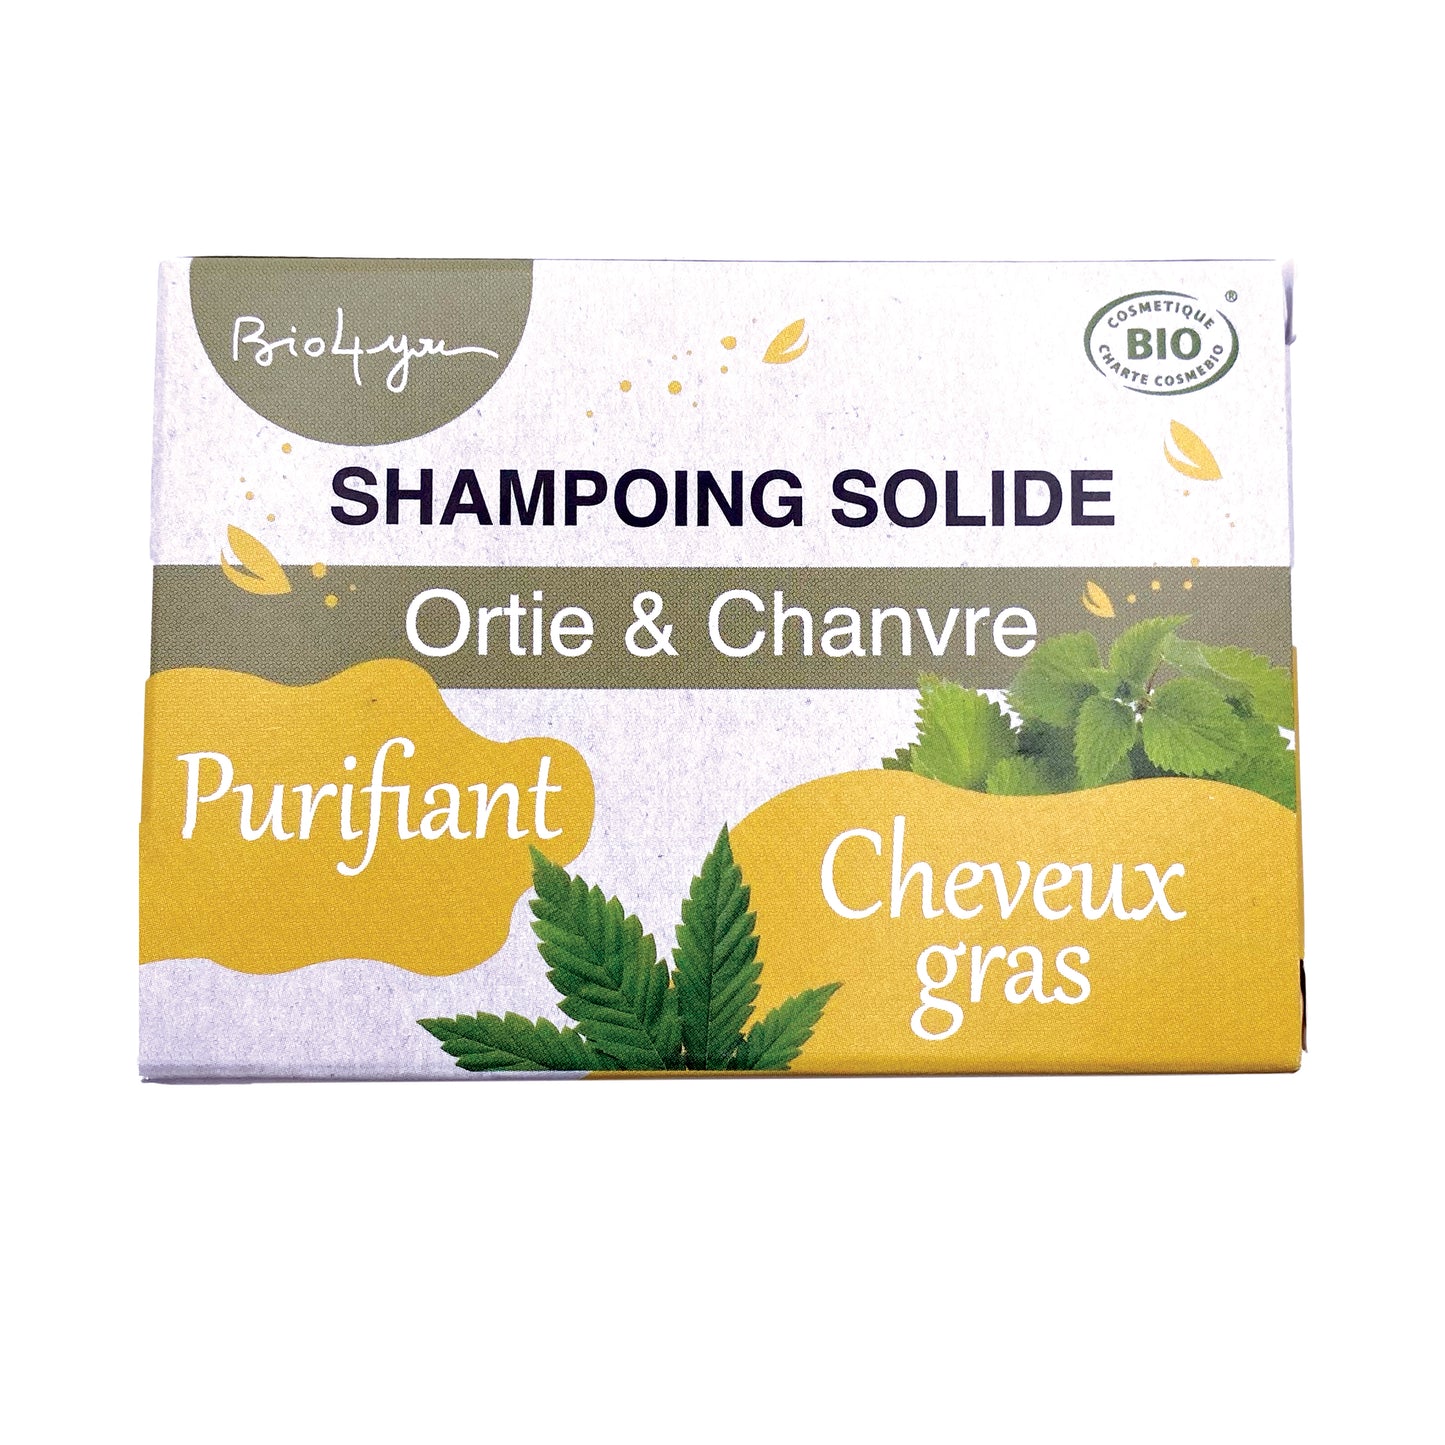 Shampoing solide pour cheveux gras - Ortie & Chanvre Bio4you